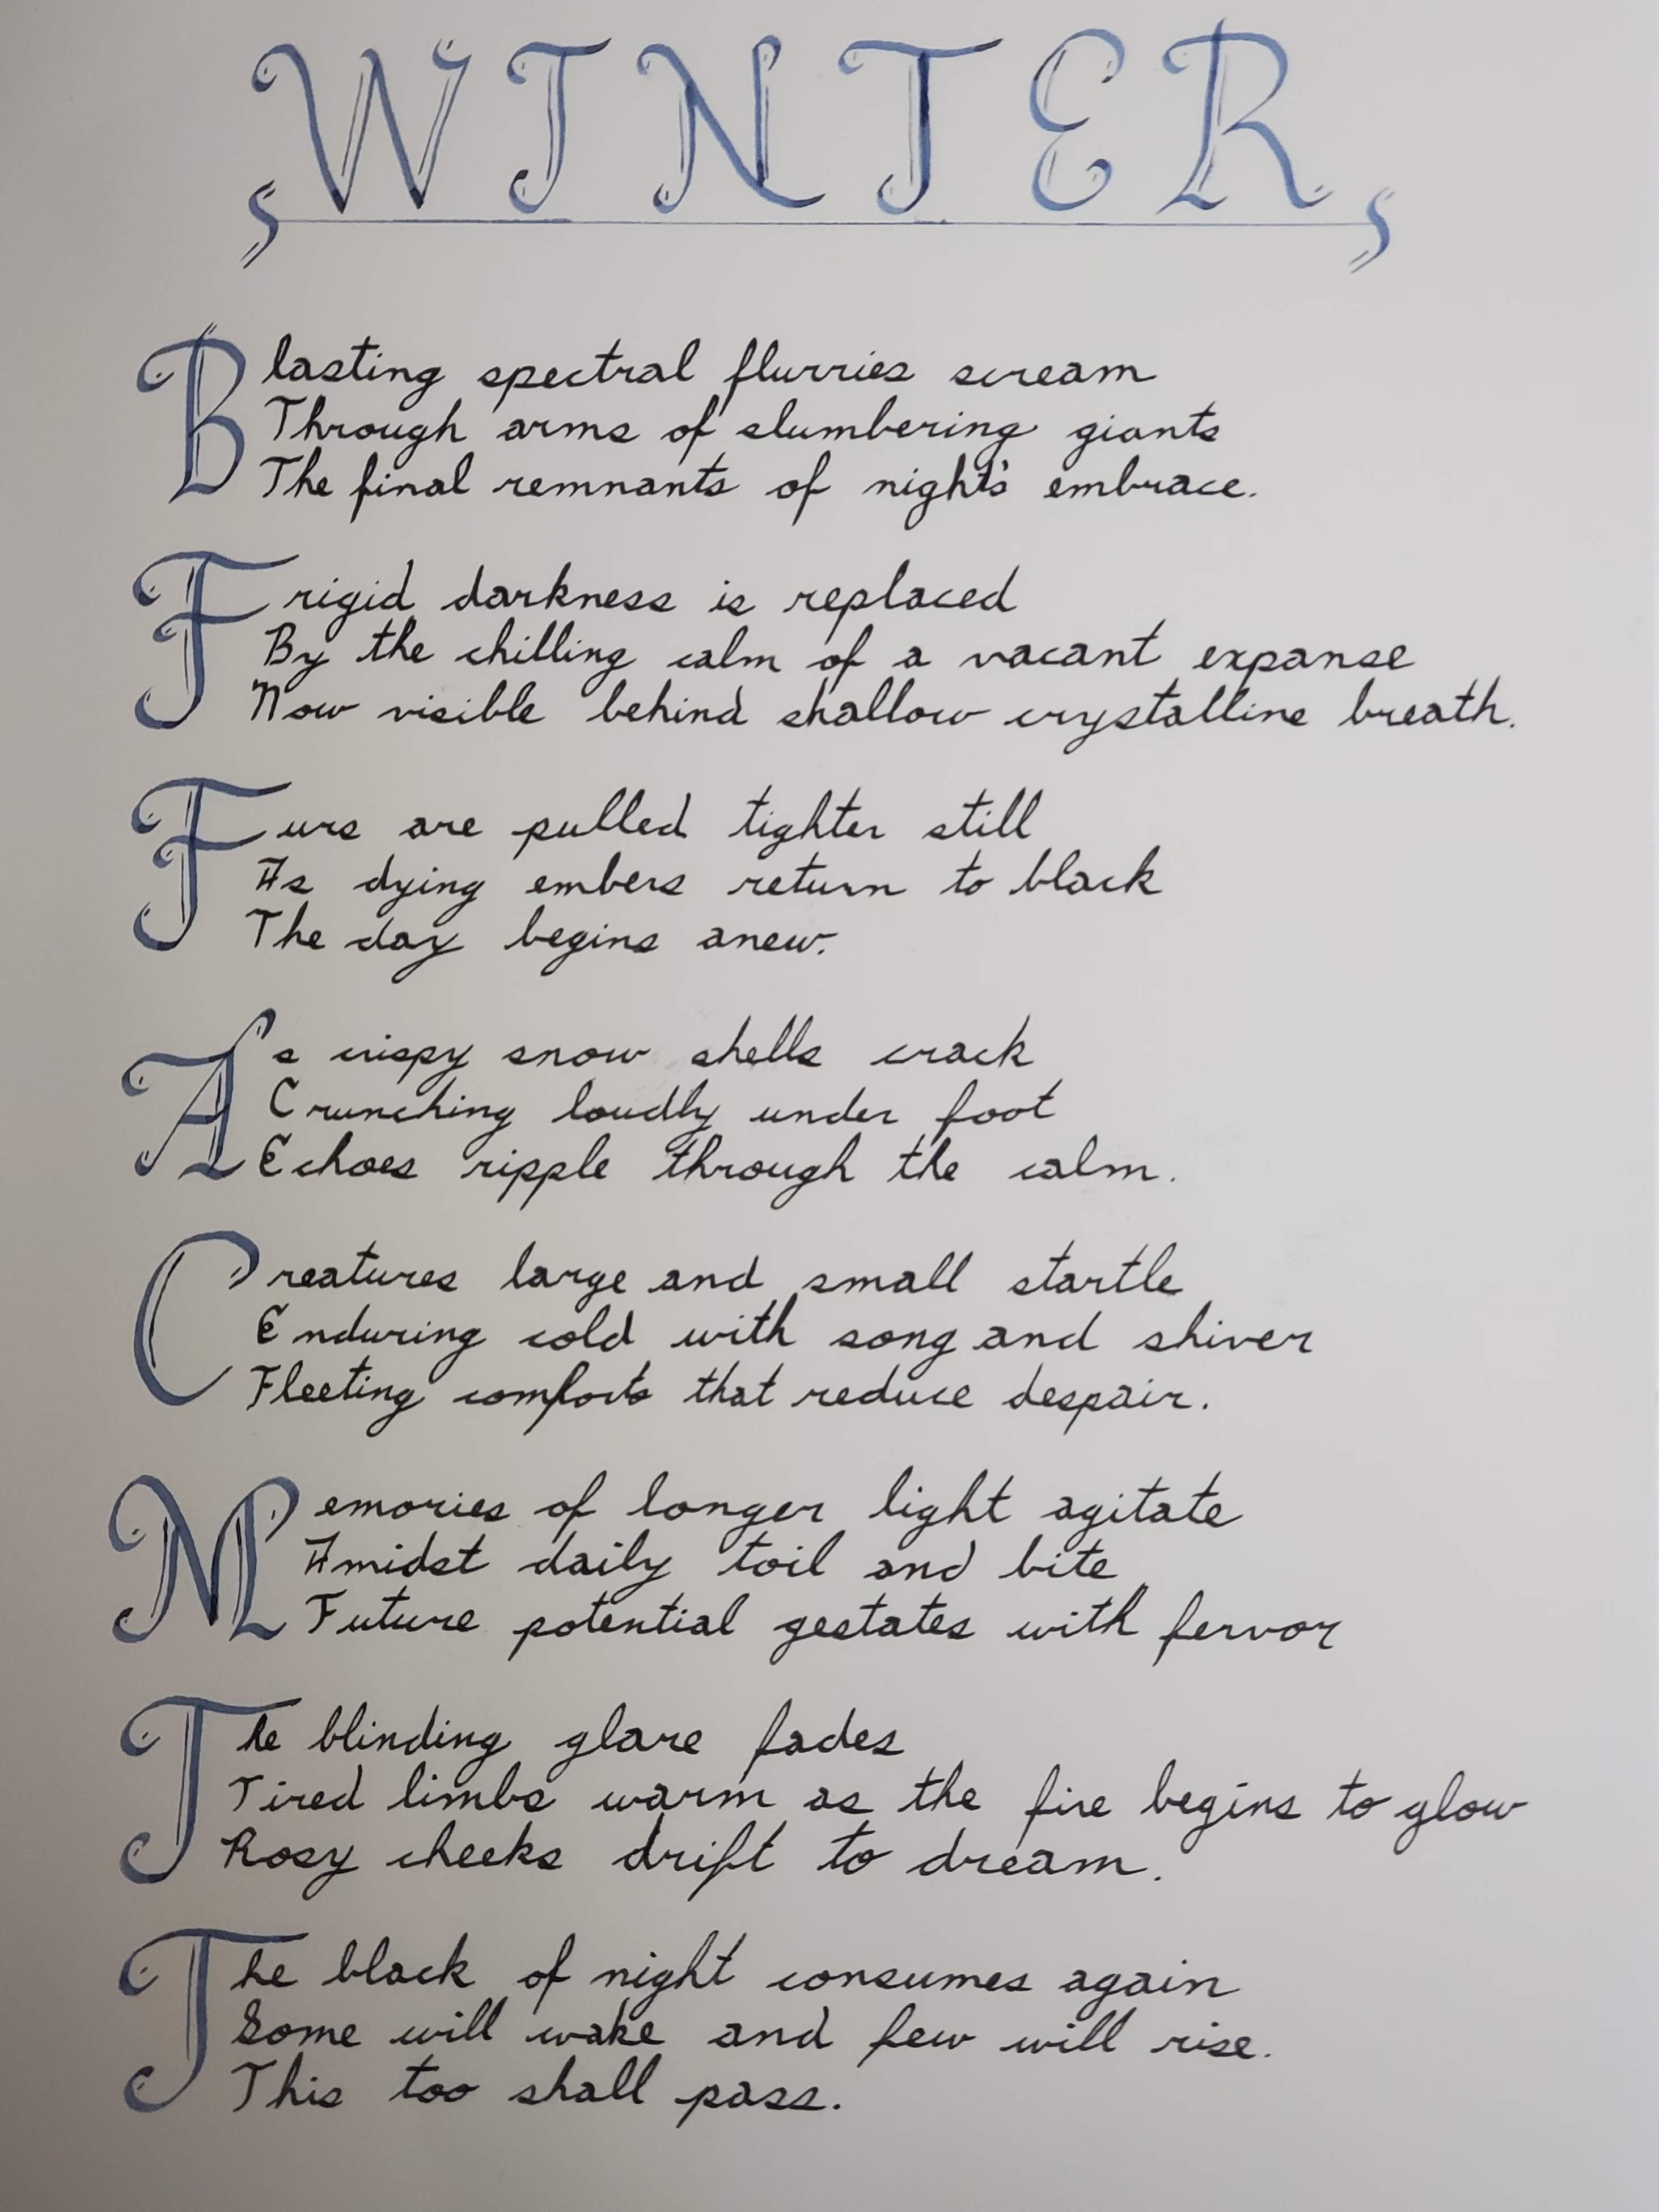 A poem written in calligraphy